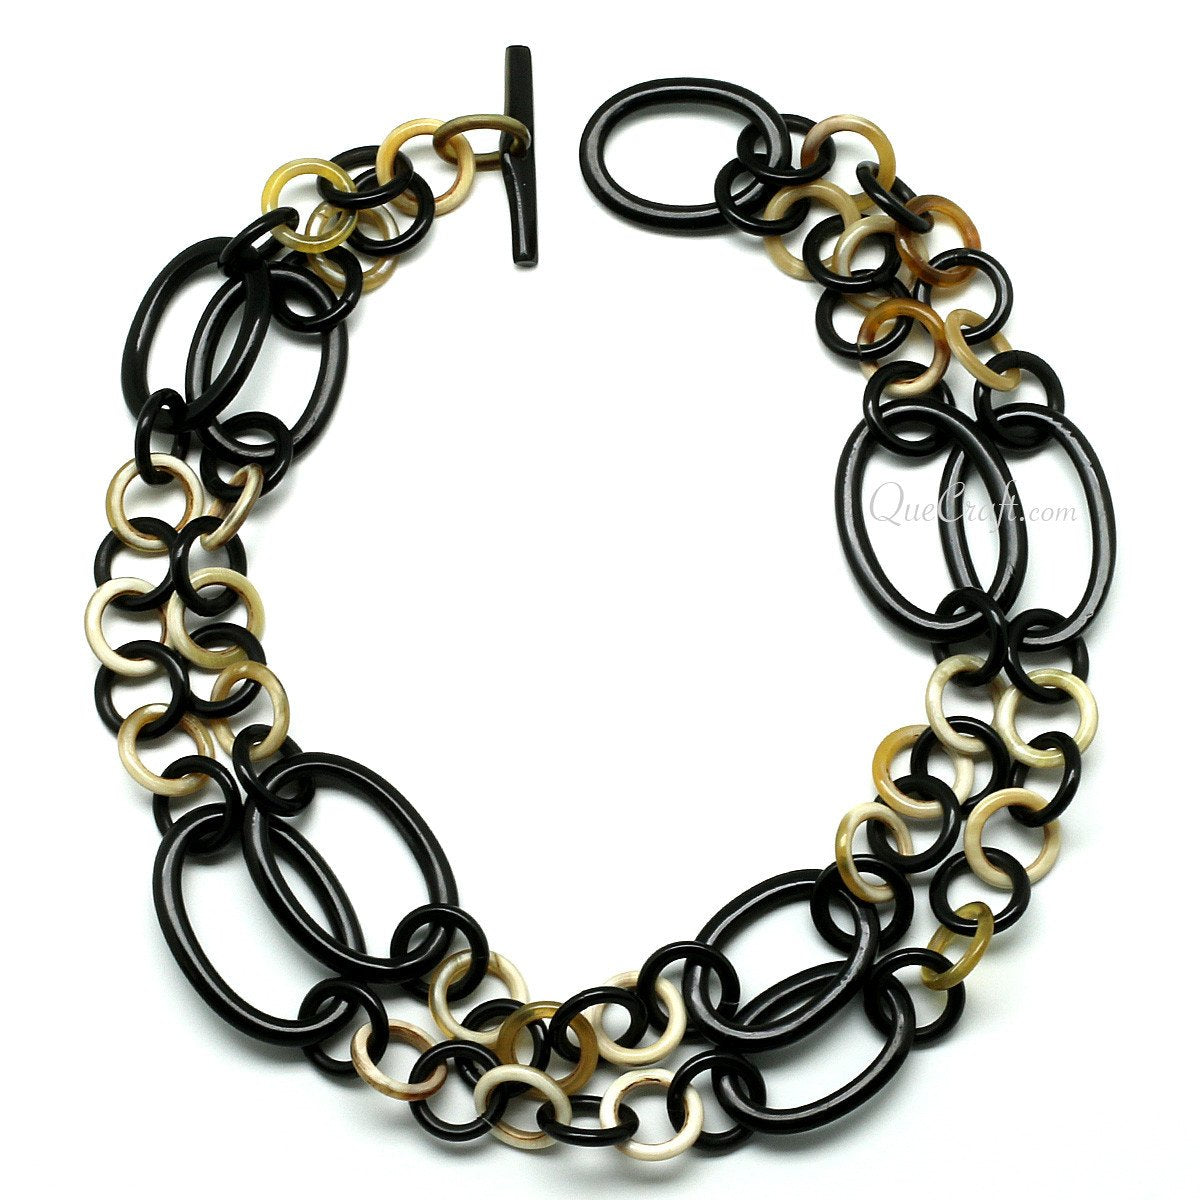 Horn Chain Necklace #11651 - HORN JEWELRY